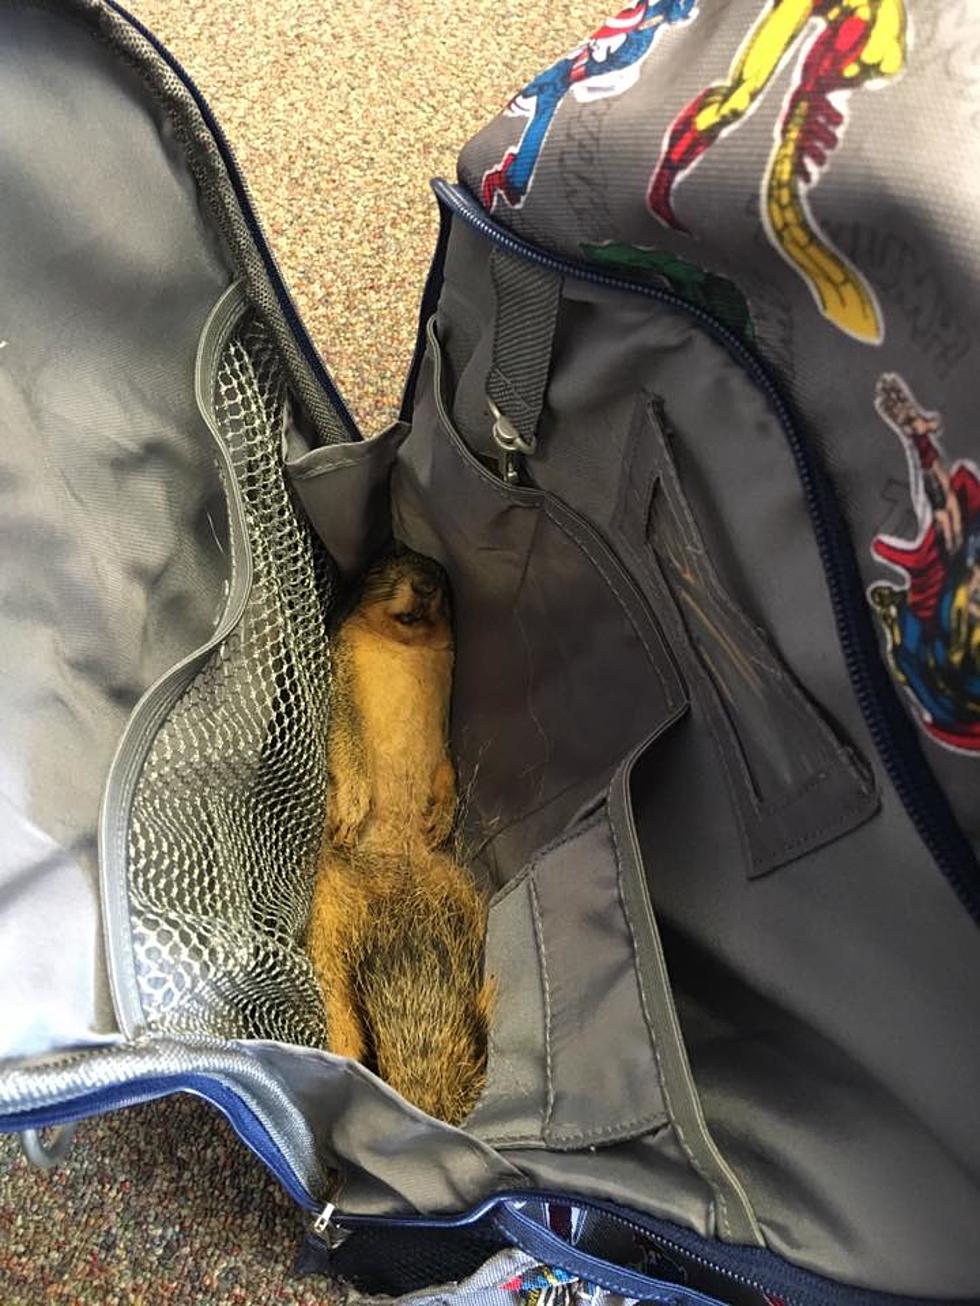 Oklahoma Student Finds Dead Squirrel and Brought it to School